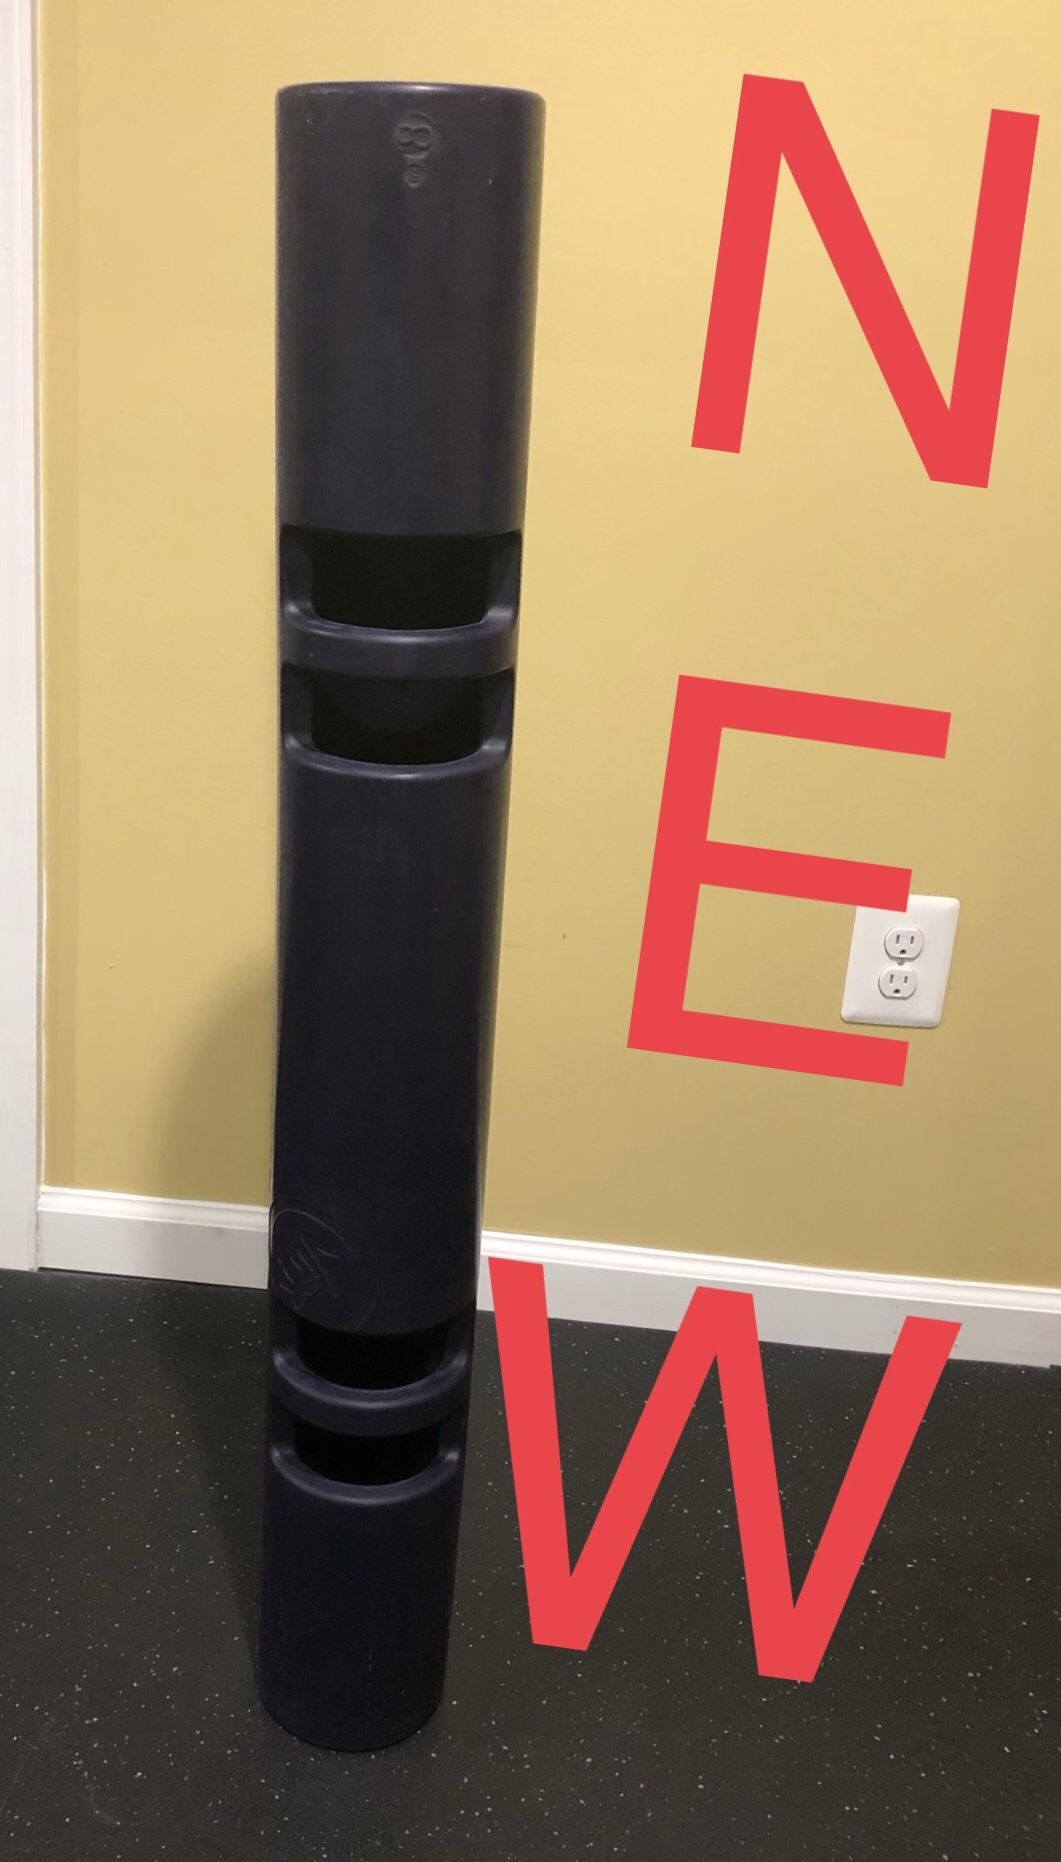 VIPR Gym Equipment- 8kg (17 lbs) Blue - Workout Tube, Brand New / Never Used